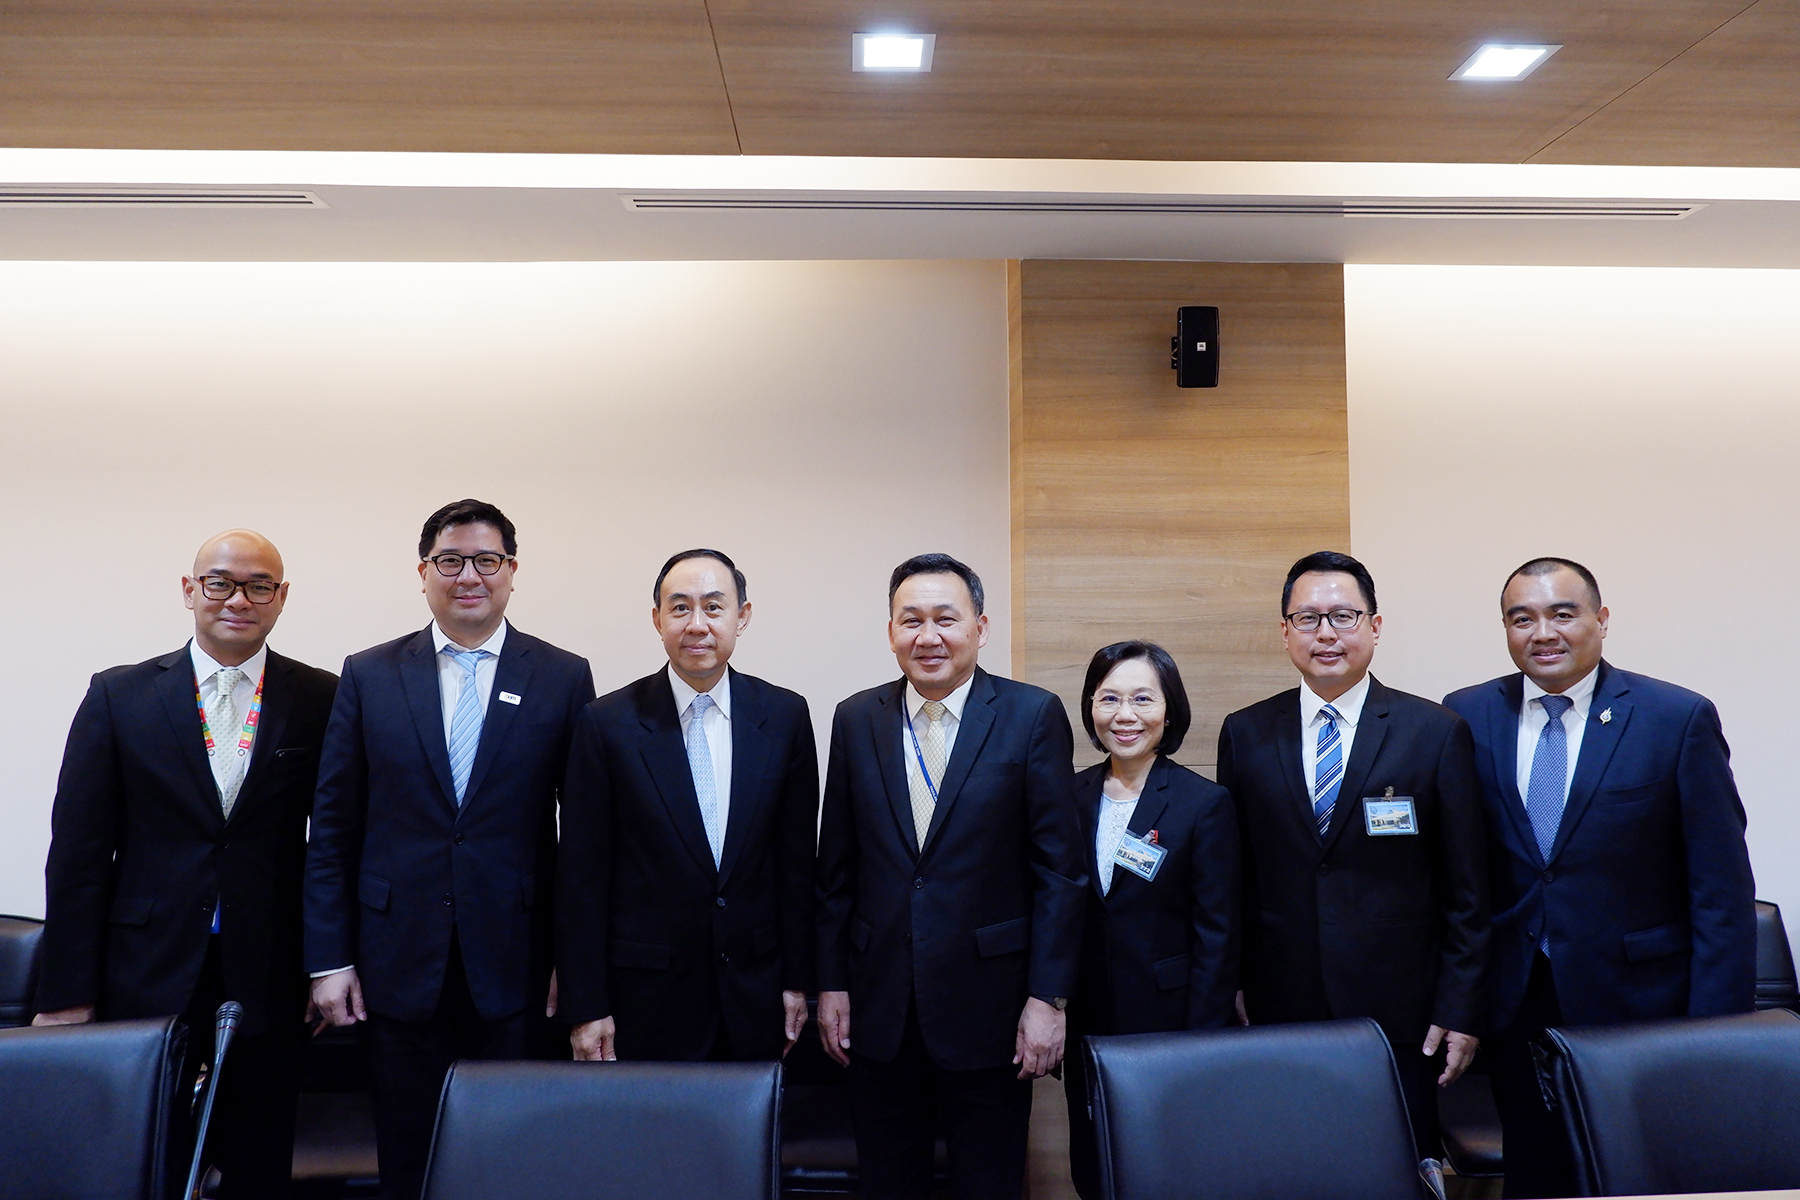 EXIM Thailand Visits Director-General of Department of South Asian, Middle East and African Affairs to Extend New Year 2020 Greetings